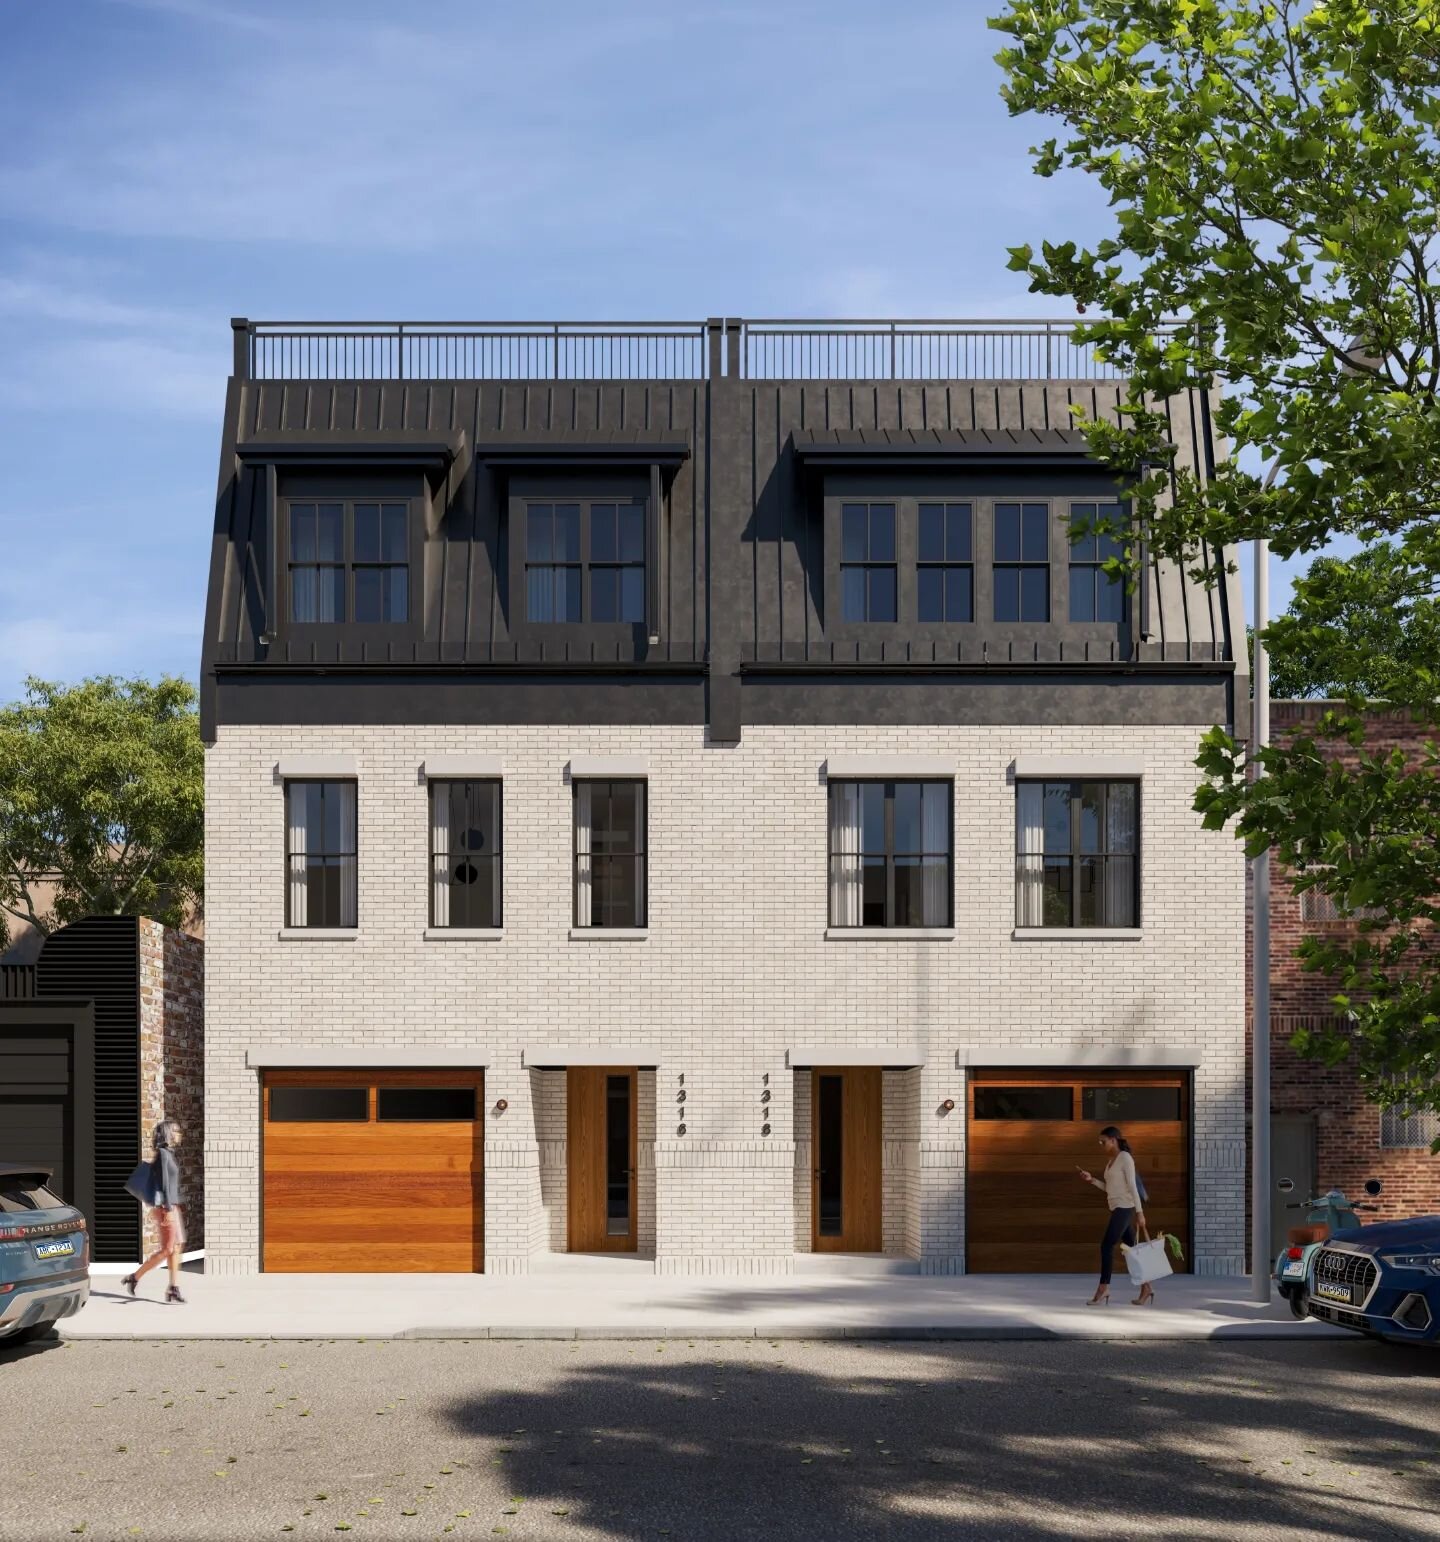 1316-18 S Juniper Street

The Duo on Juniper in the heart of Passyunk Square. Recently completed.
These extra wide, luxury new construction homes with parking were built with major attention to detail and design. These beauties sit on roughly 21 foot